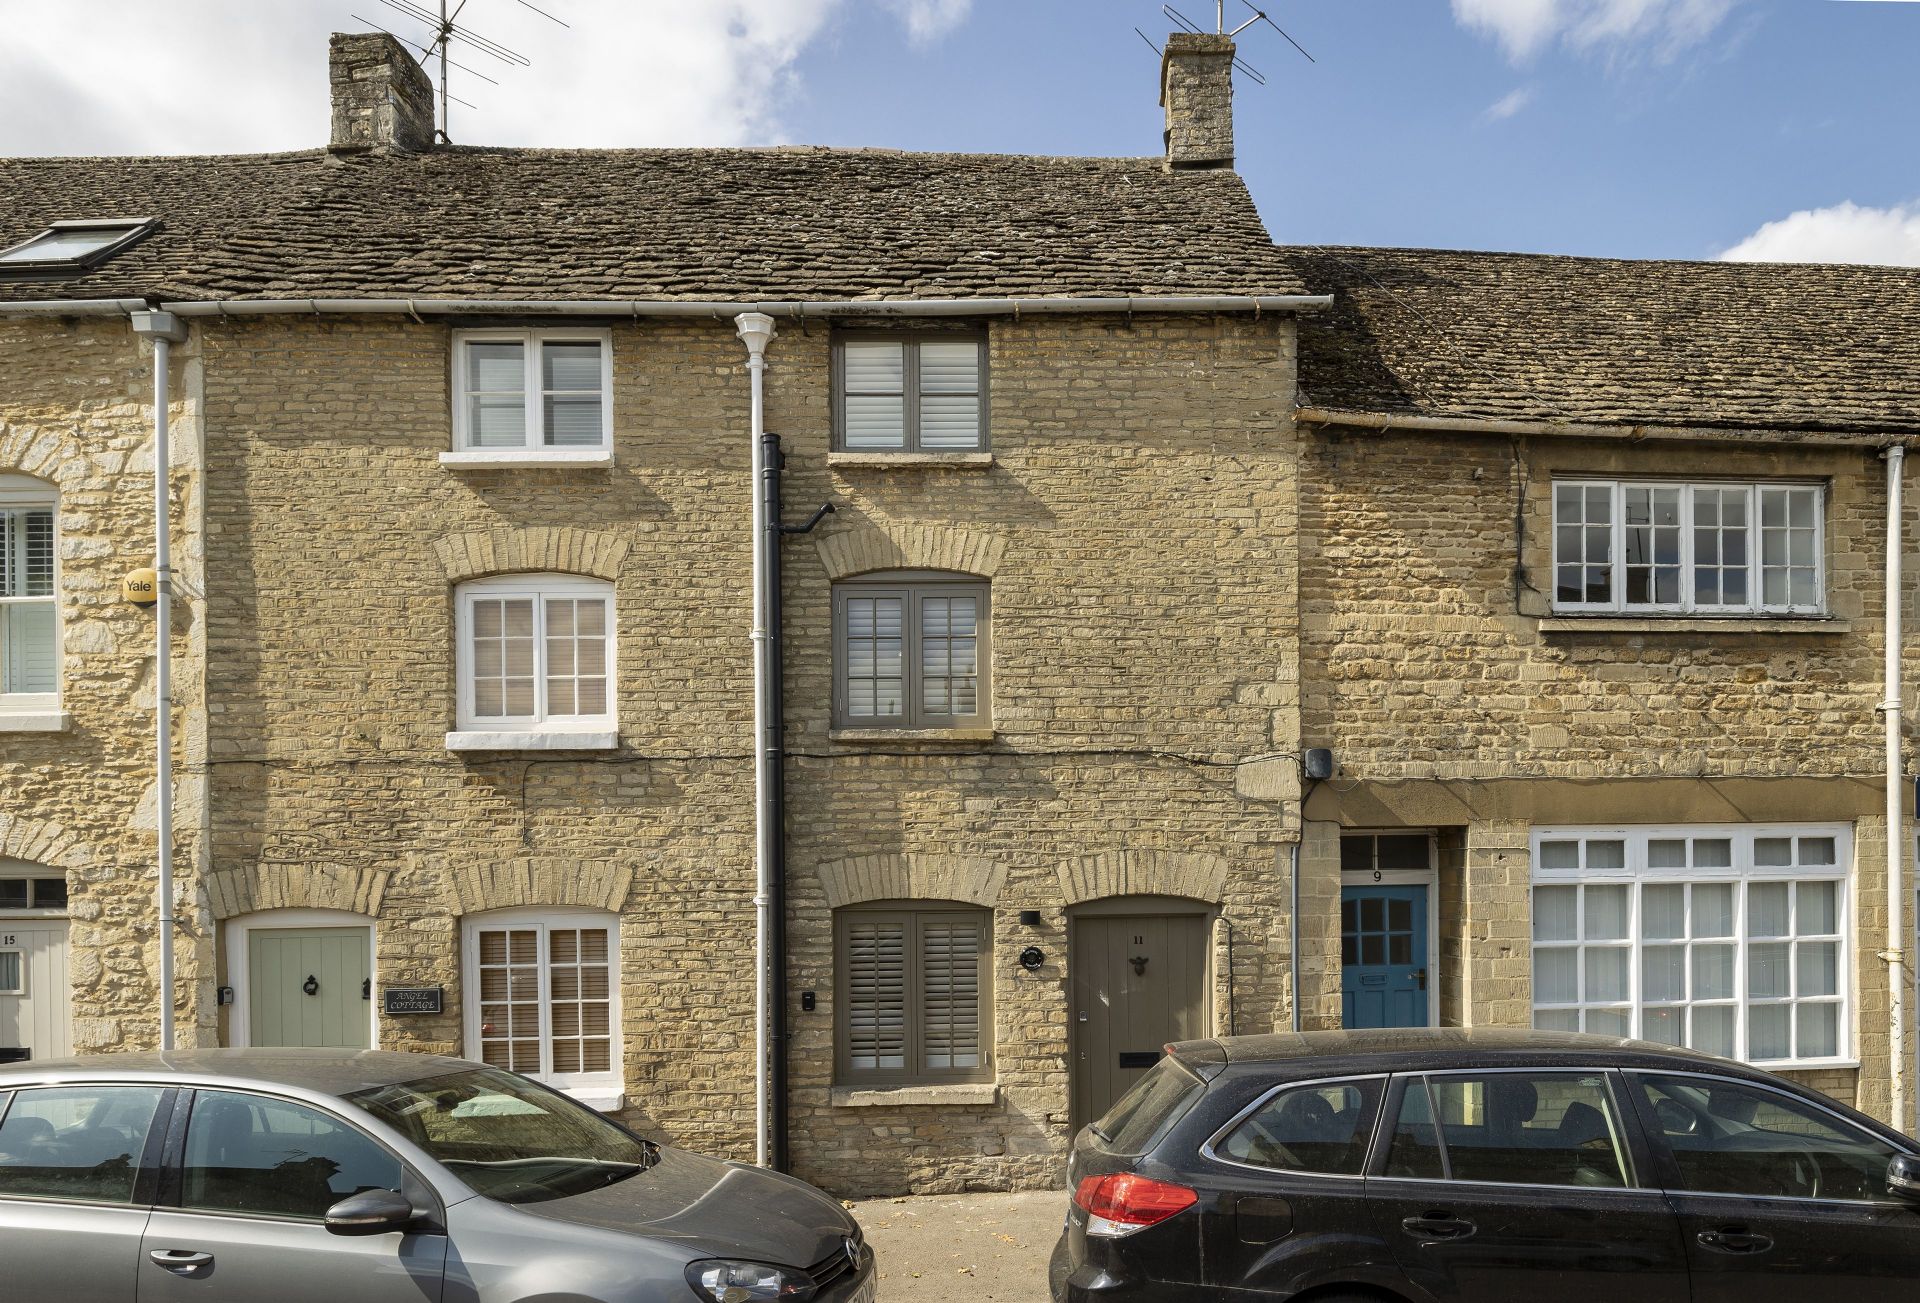 Squirrel Cottage is located in Tetbury